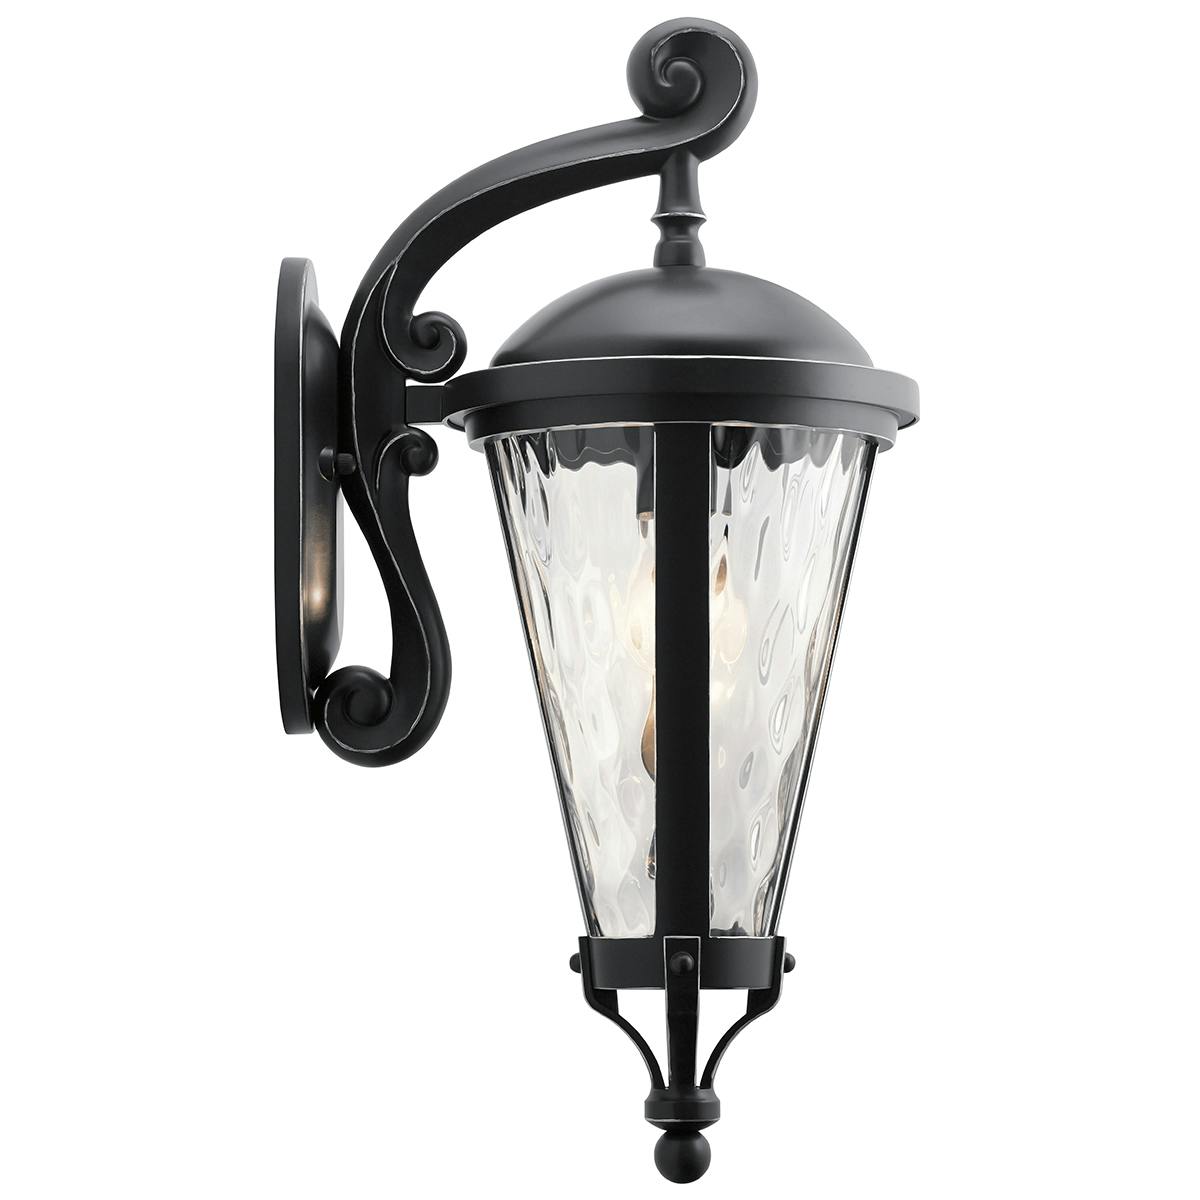 Profile view of the Cresleigh 22" 1 Light Wall Light Black on a white background